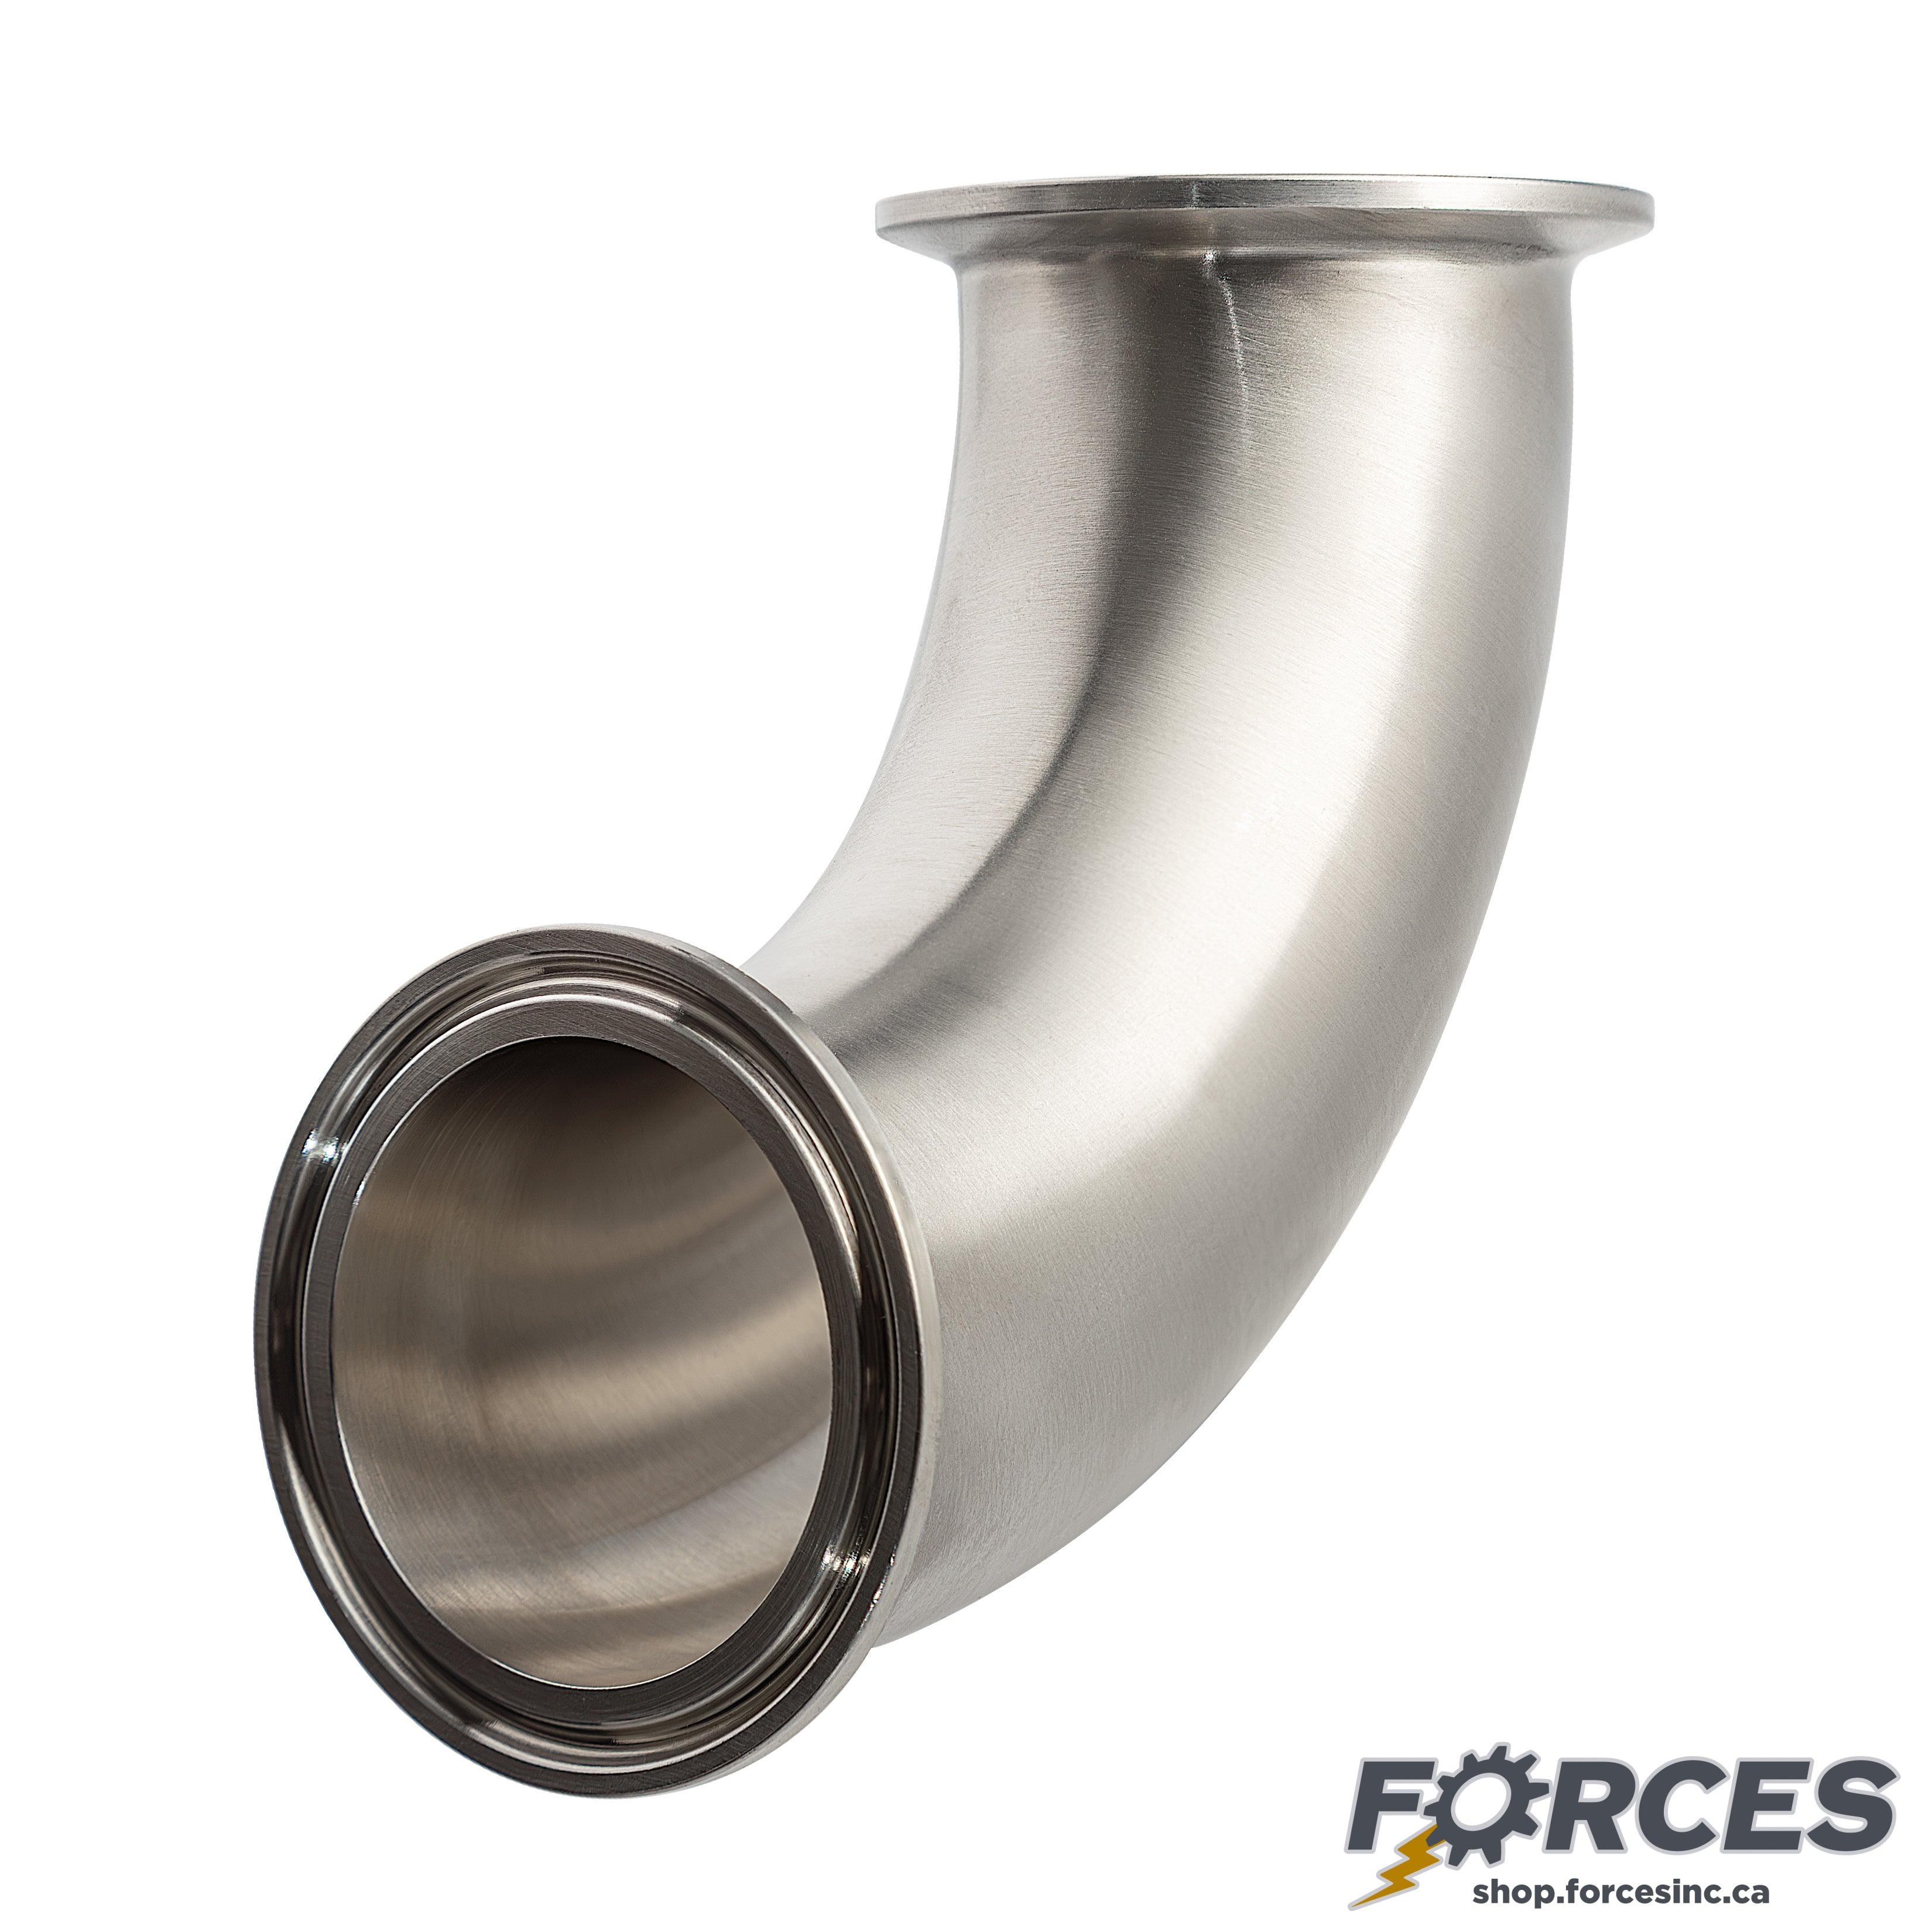 3/4" Tri-Clamp 90° Elbow - Stainless Steel 316 - Forces Inc